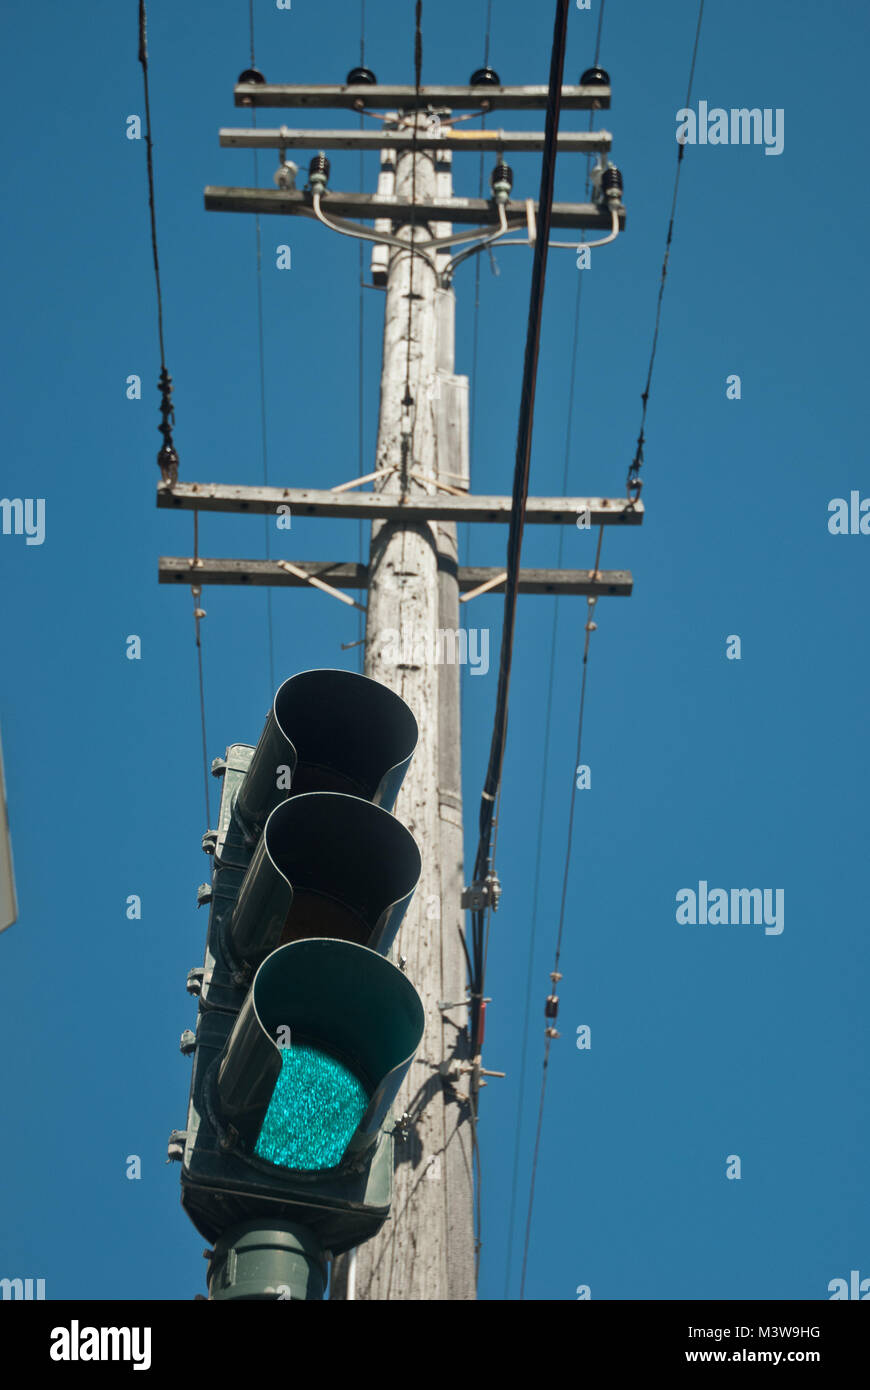 A traffic light on green in front of a wooden electricity pylon Stock Photo